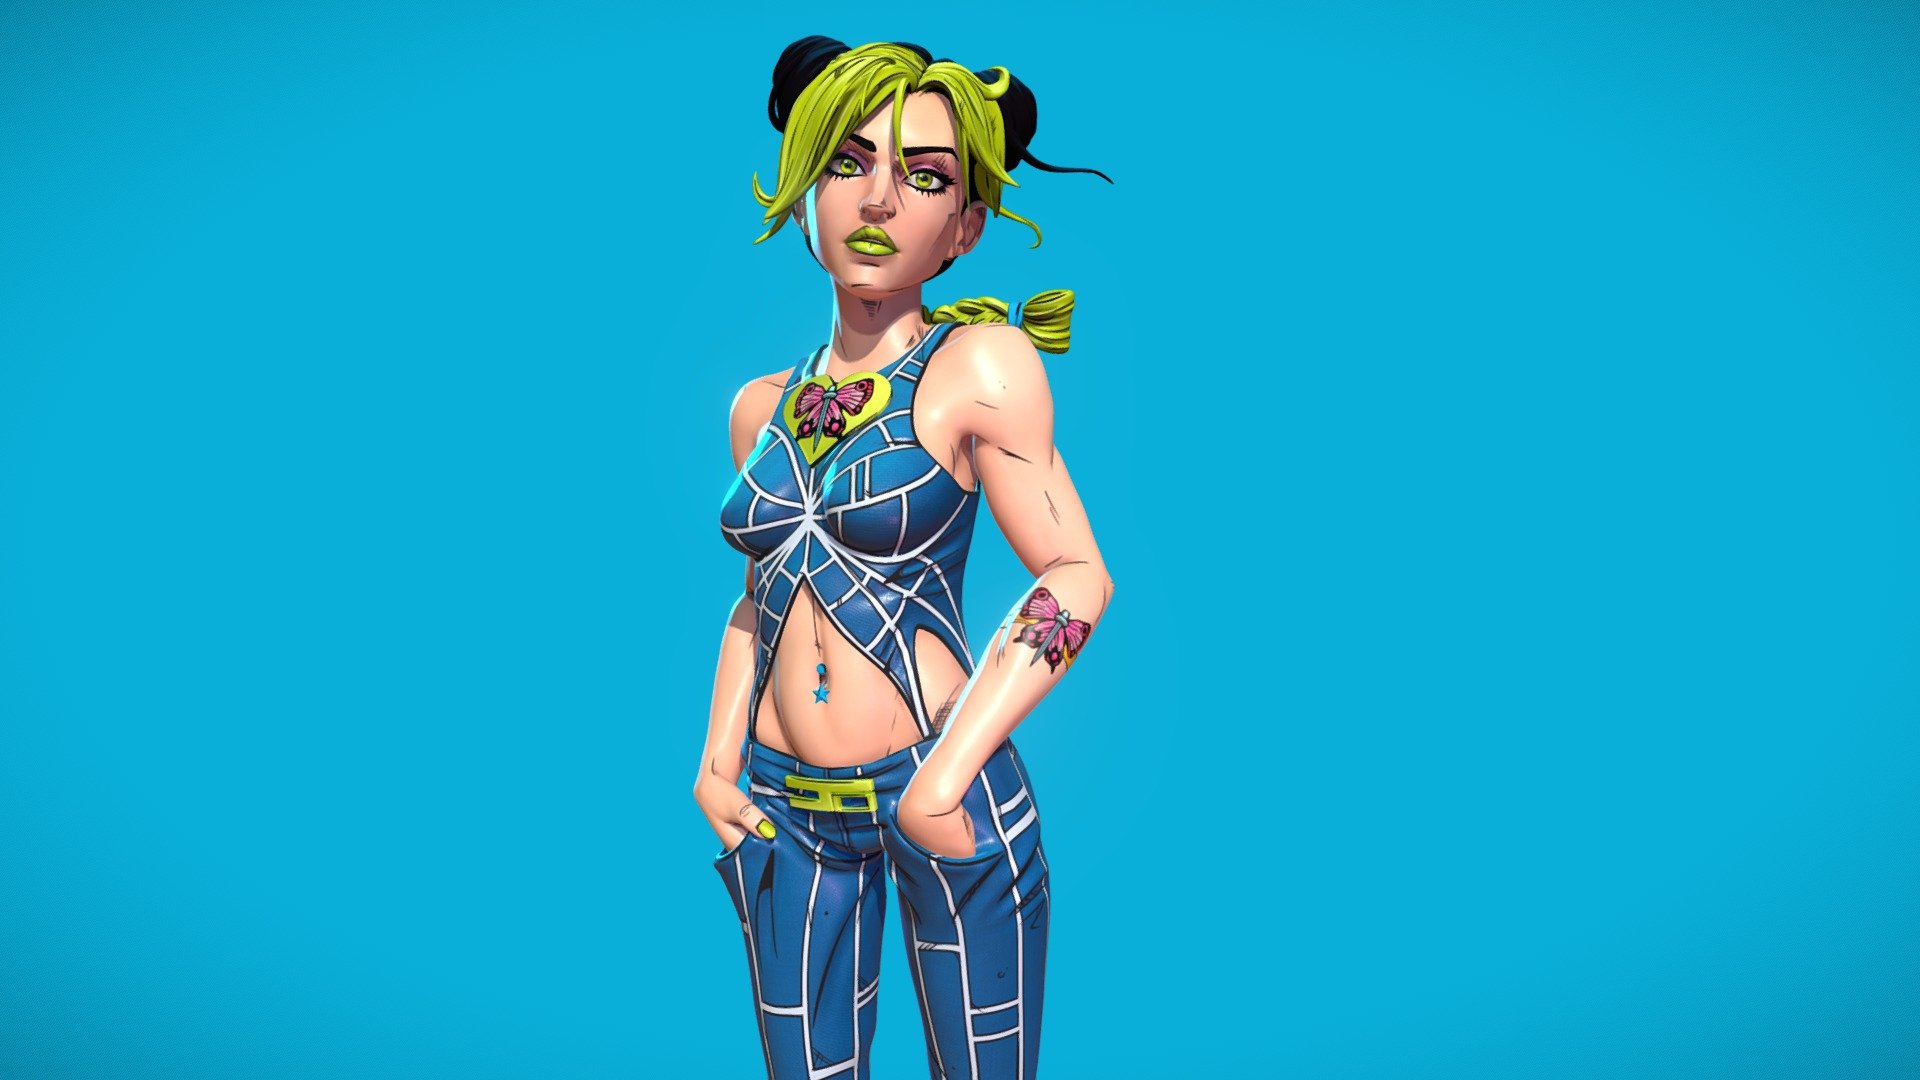 Link to the Artstation page:
Just a small piece of fan art to celebrate my discovery and subsequent newfound love for JoJo's Bizarre Adventure! Not seen Jolyne in action yet but I loved her design a lot. The model is a ZBrush sculpt that I decimated and textured in Substance Painter, so excuse the weird topology and UVs :P This was more for fun than anything!
Hope you all enjoy! - Jolyne Cujoh - JoJo's Bizarre Adventure fan art - 3D model by SovereignWalrus 3d model